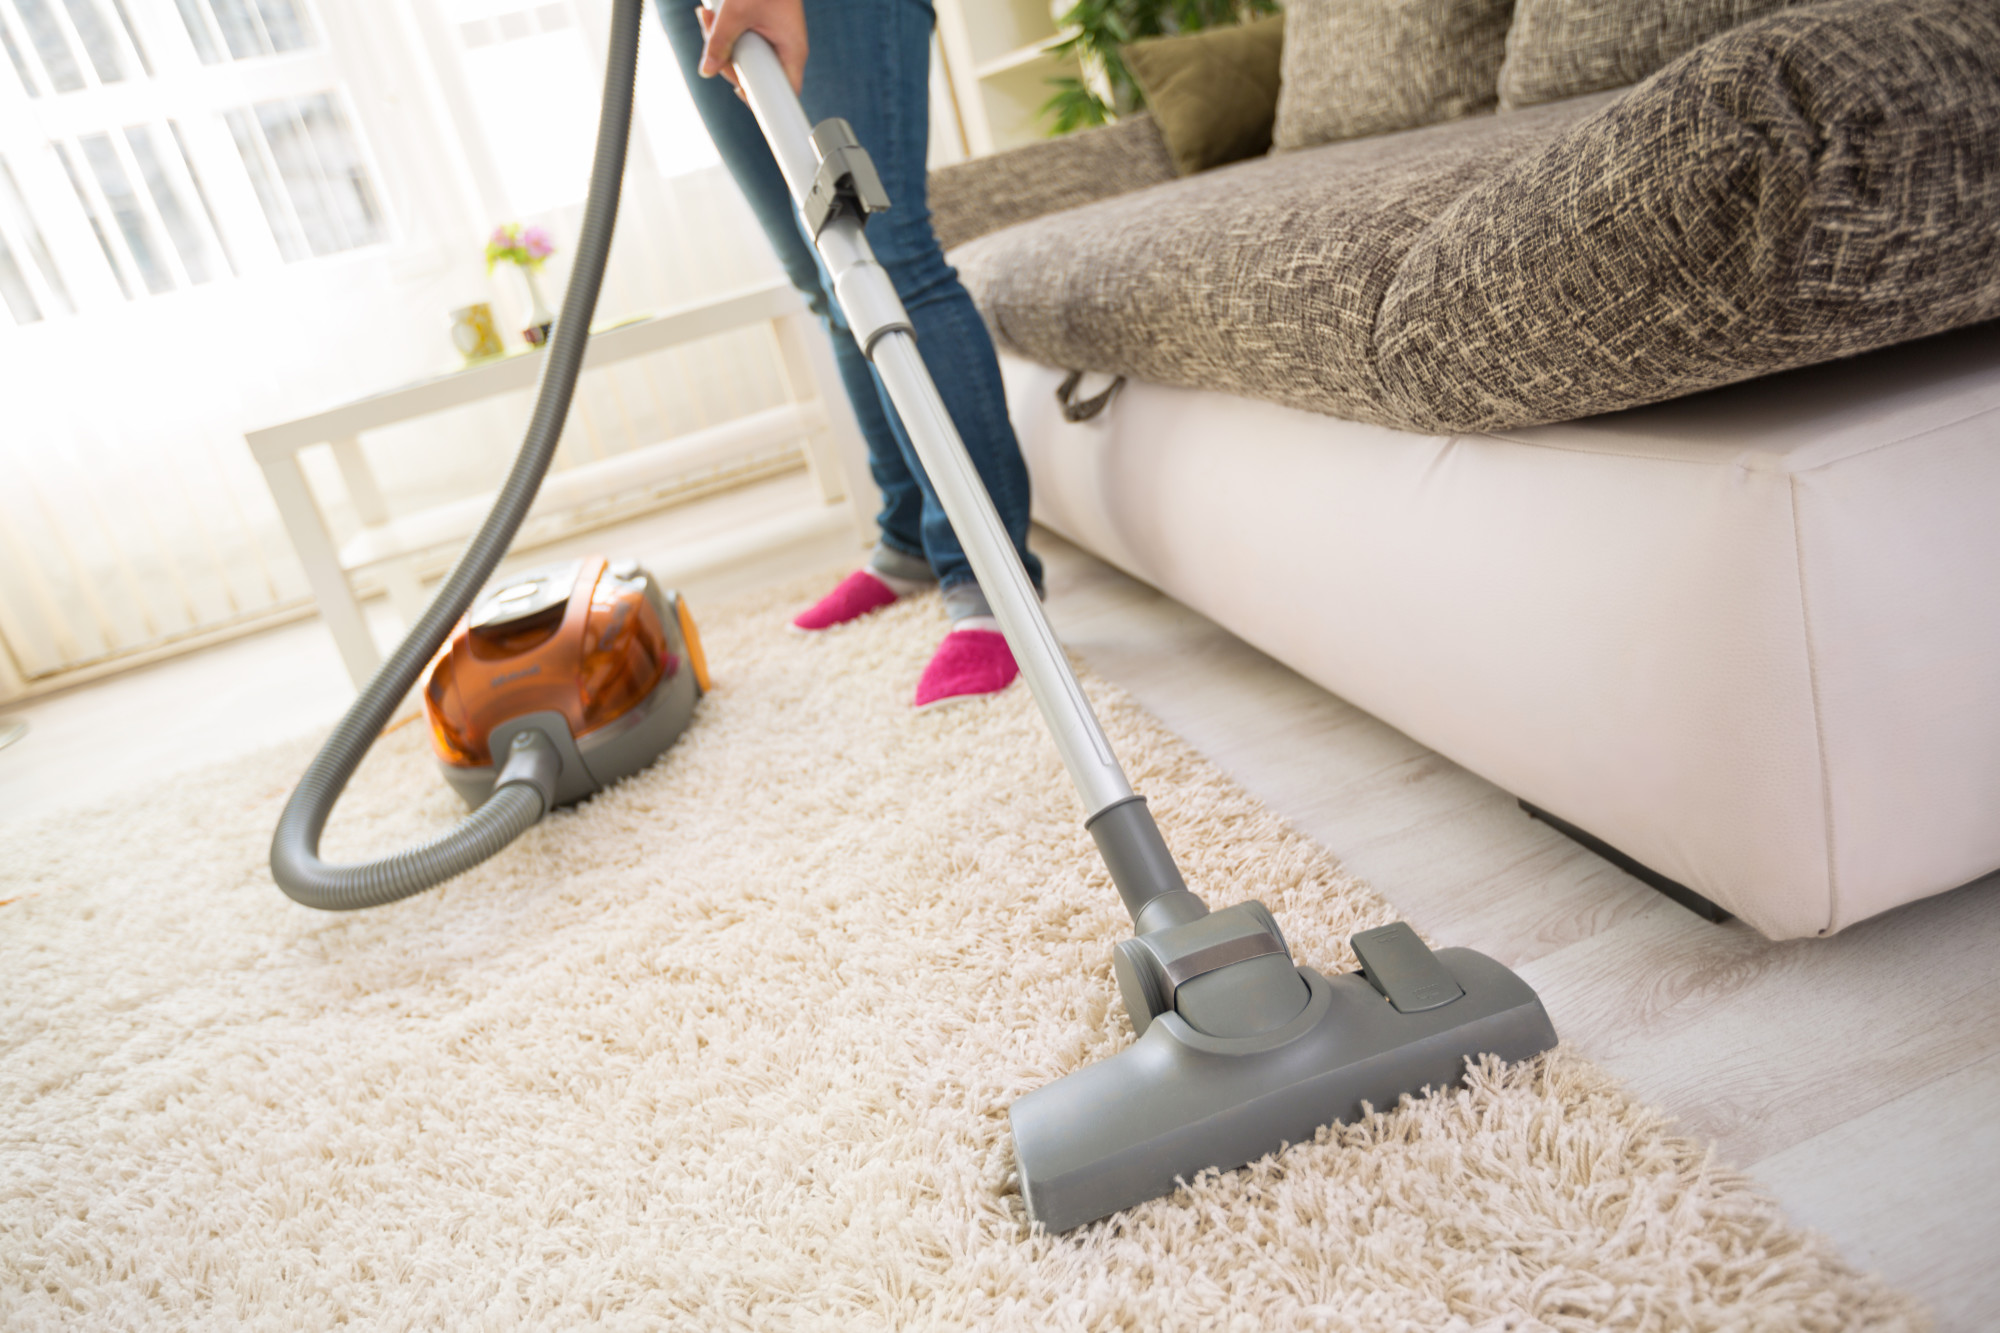 If you have a water-damaged carpet, can it be repaired or will you need to replace it? We're laying out your top options in this guide.